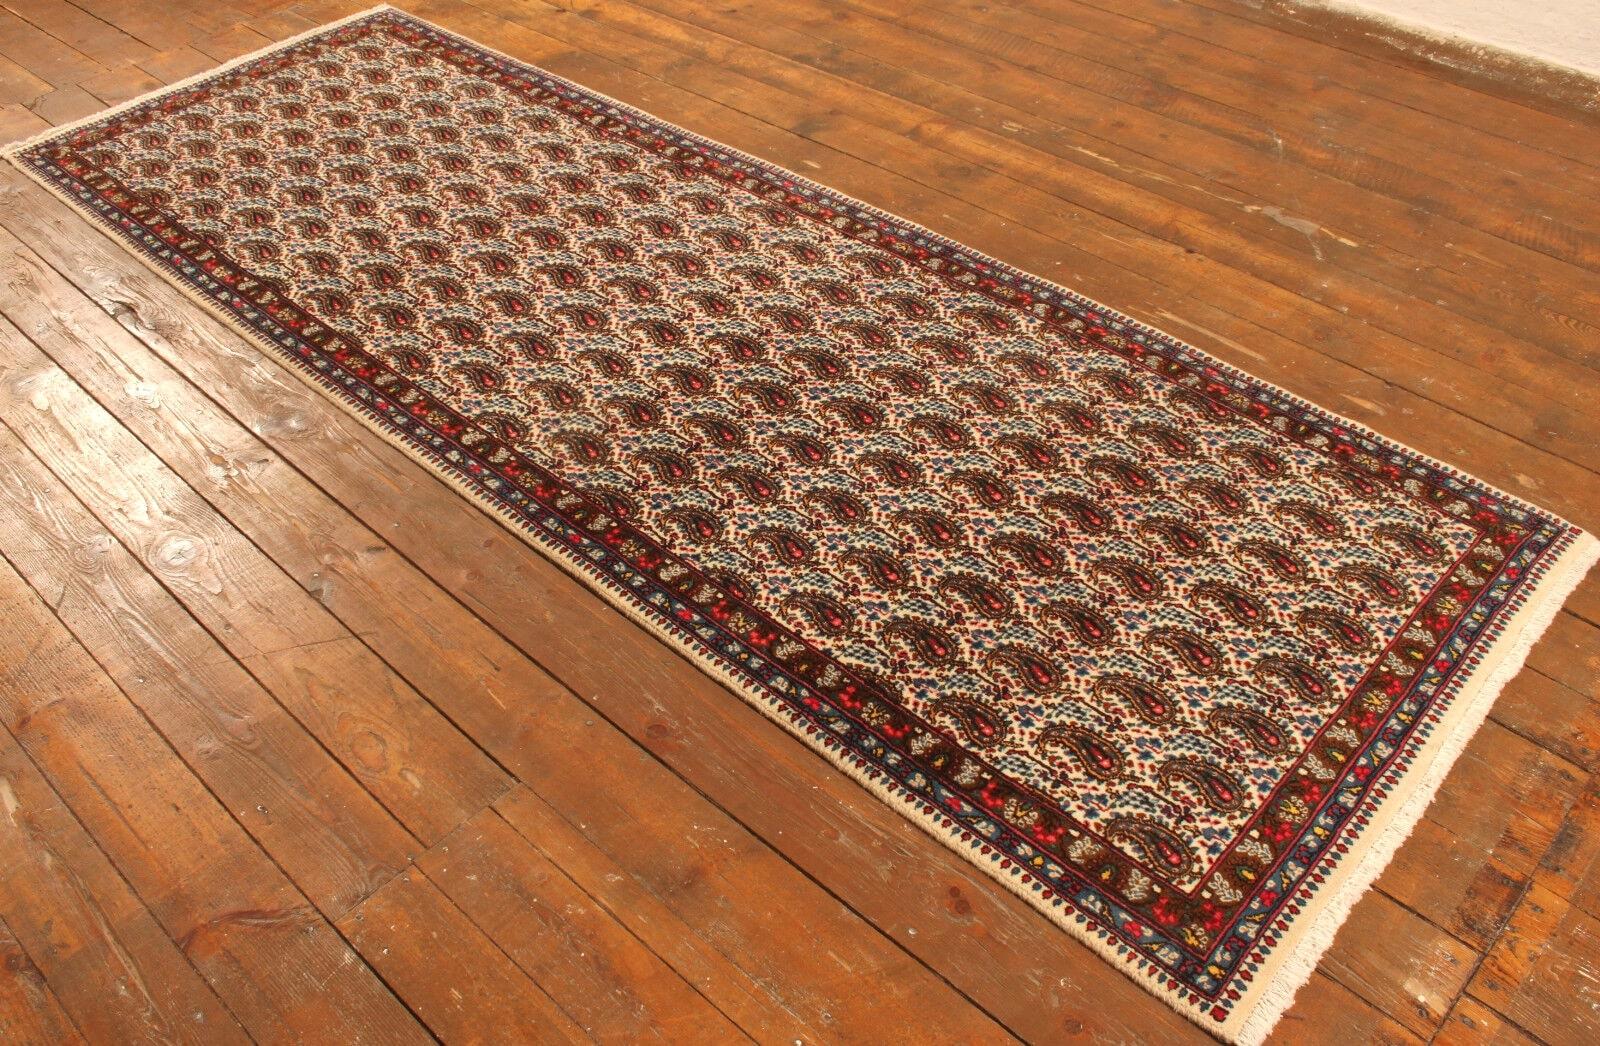 Handmade Vintage Persian Style Senneh Runner Rug (3.4’ x 10.1’ / 106cm x 309cm)

Elevate your home with the intricate elegance of our Handmade Vintage Persian Style Senneh Runner Rug. From the 1970s, this woolen runner rug measures 3.4’ x 10.1’